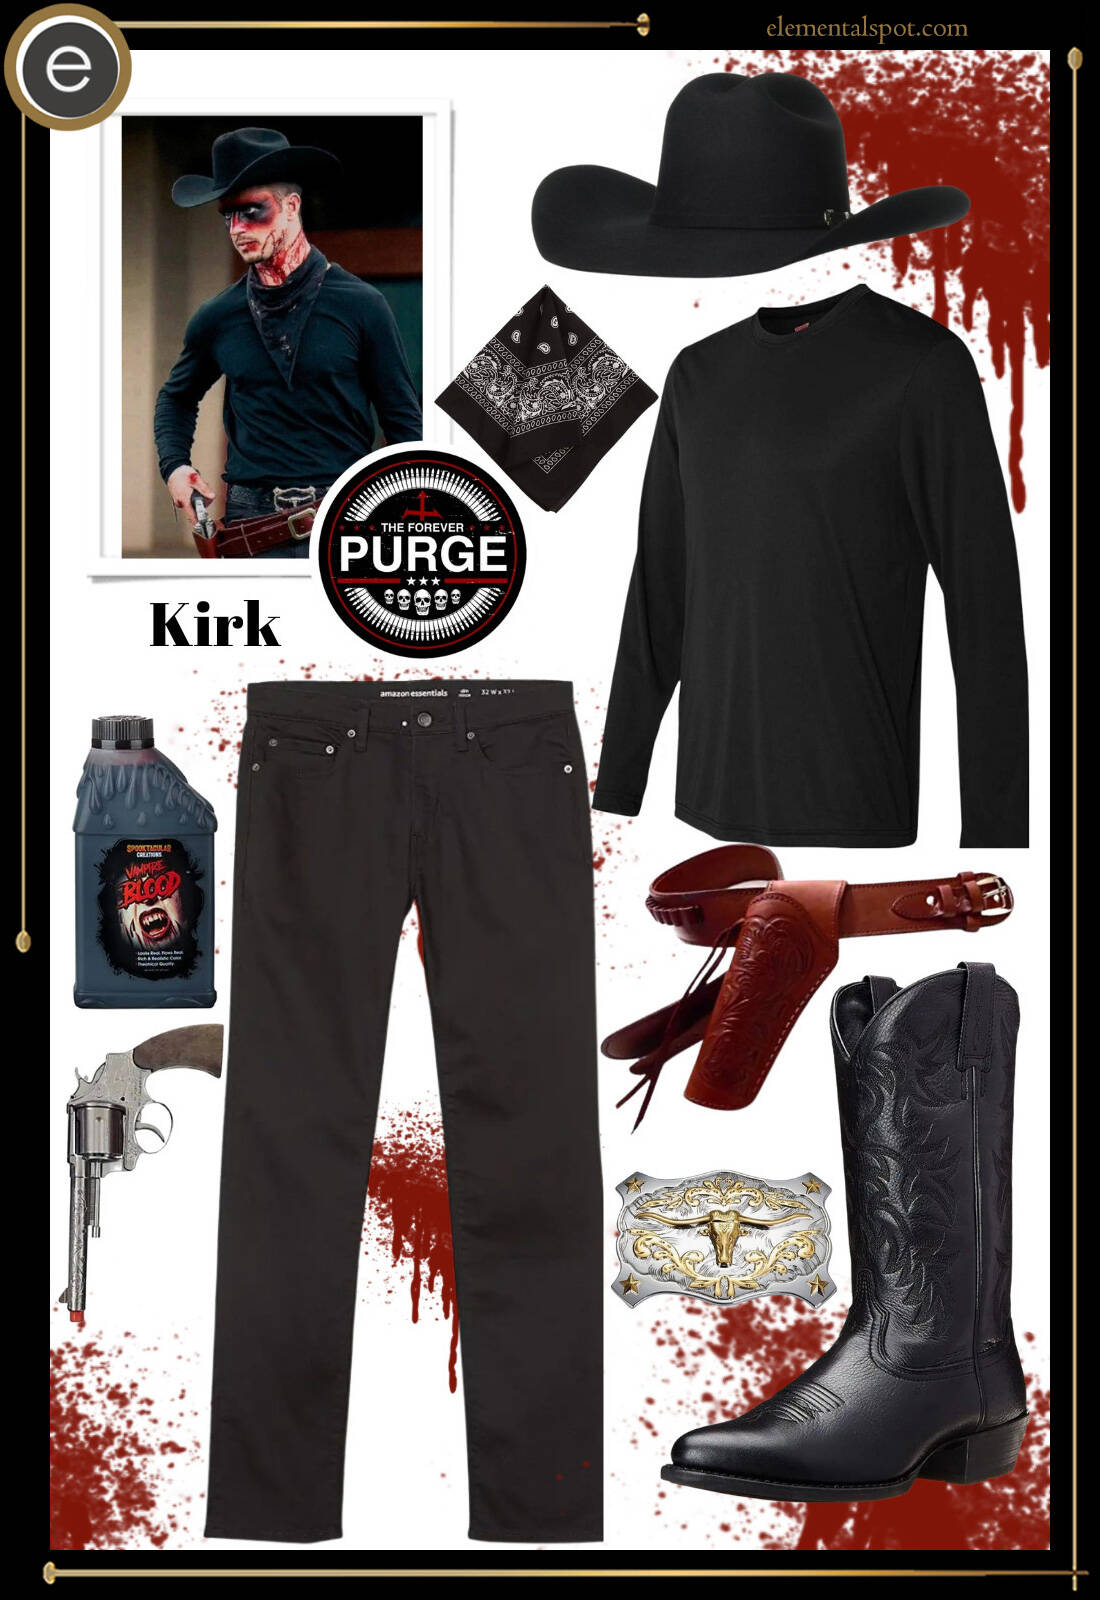 costume-Kirk-The Forever Purge